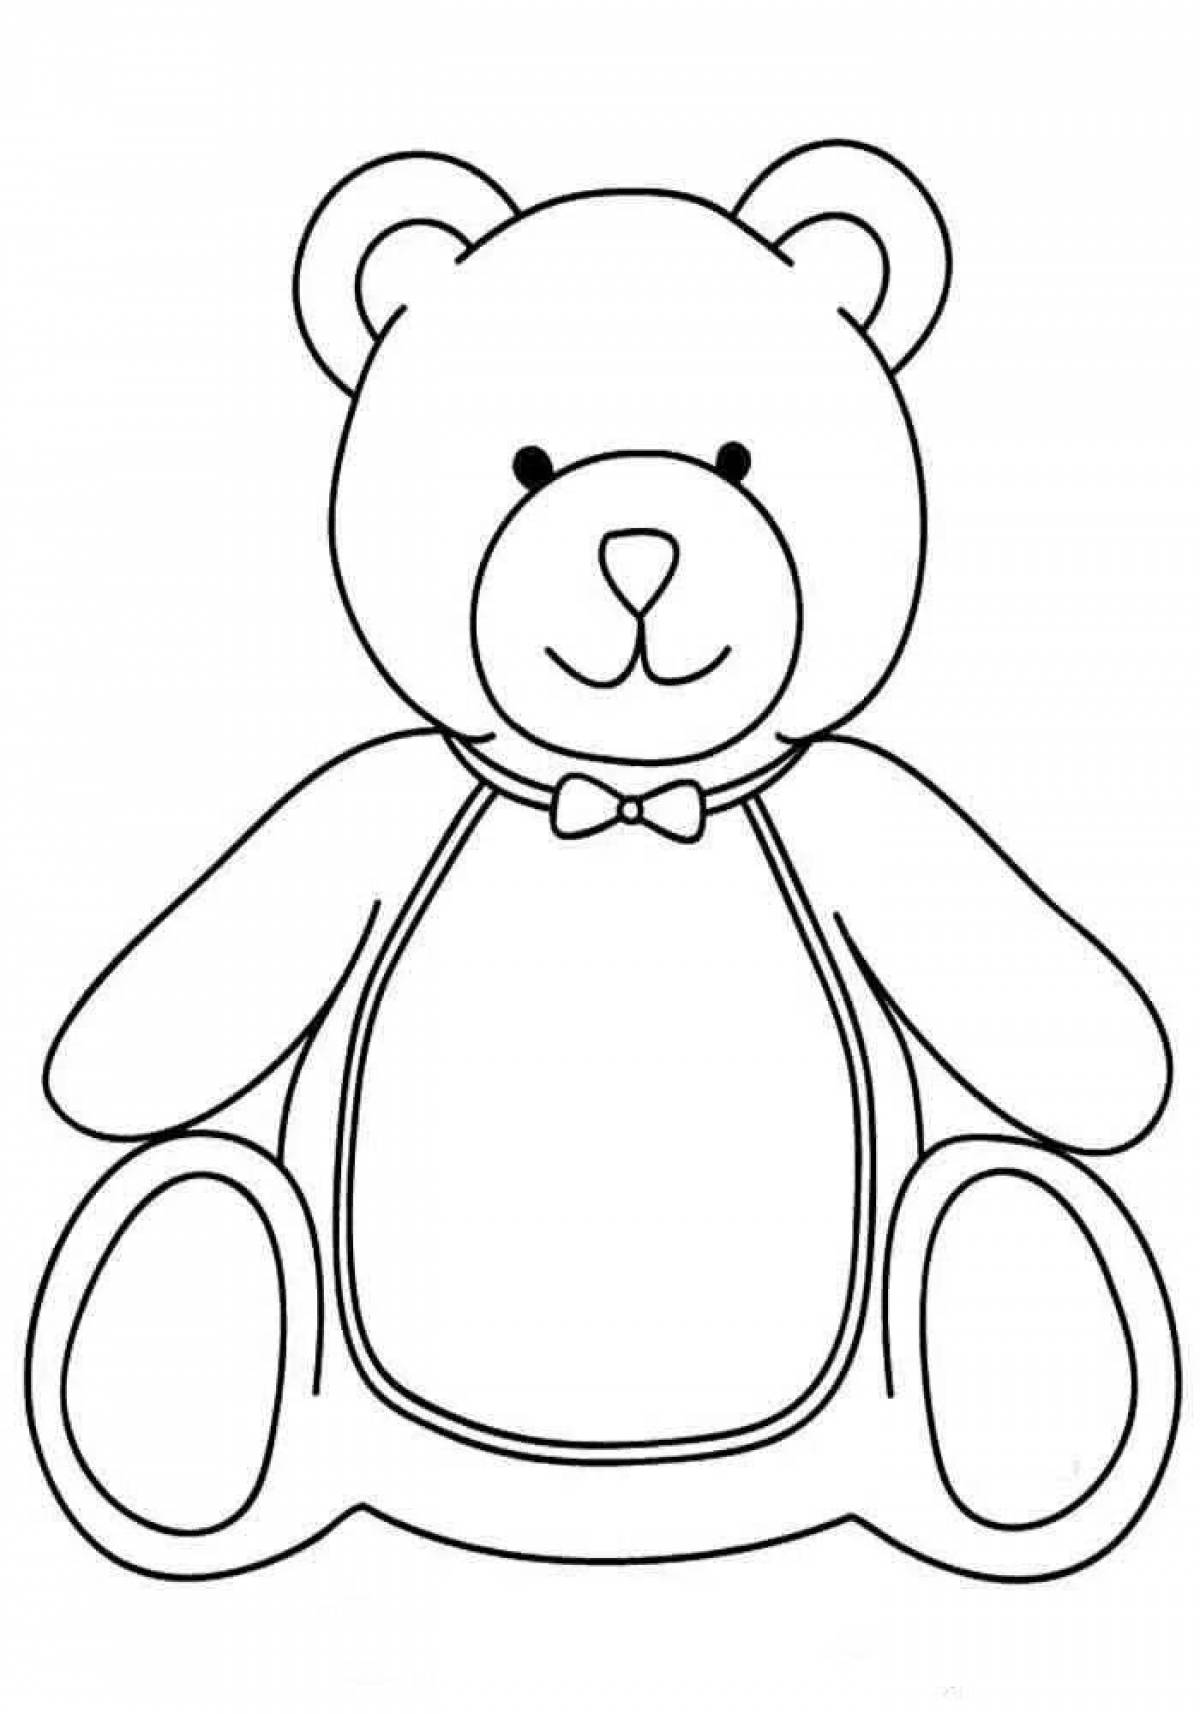 Coloring book smiling teddy bear